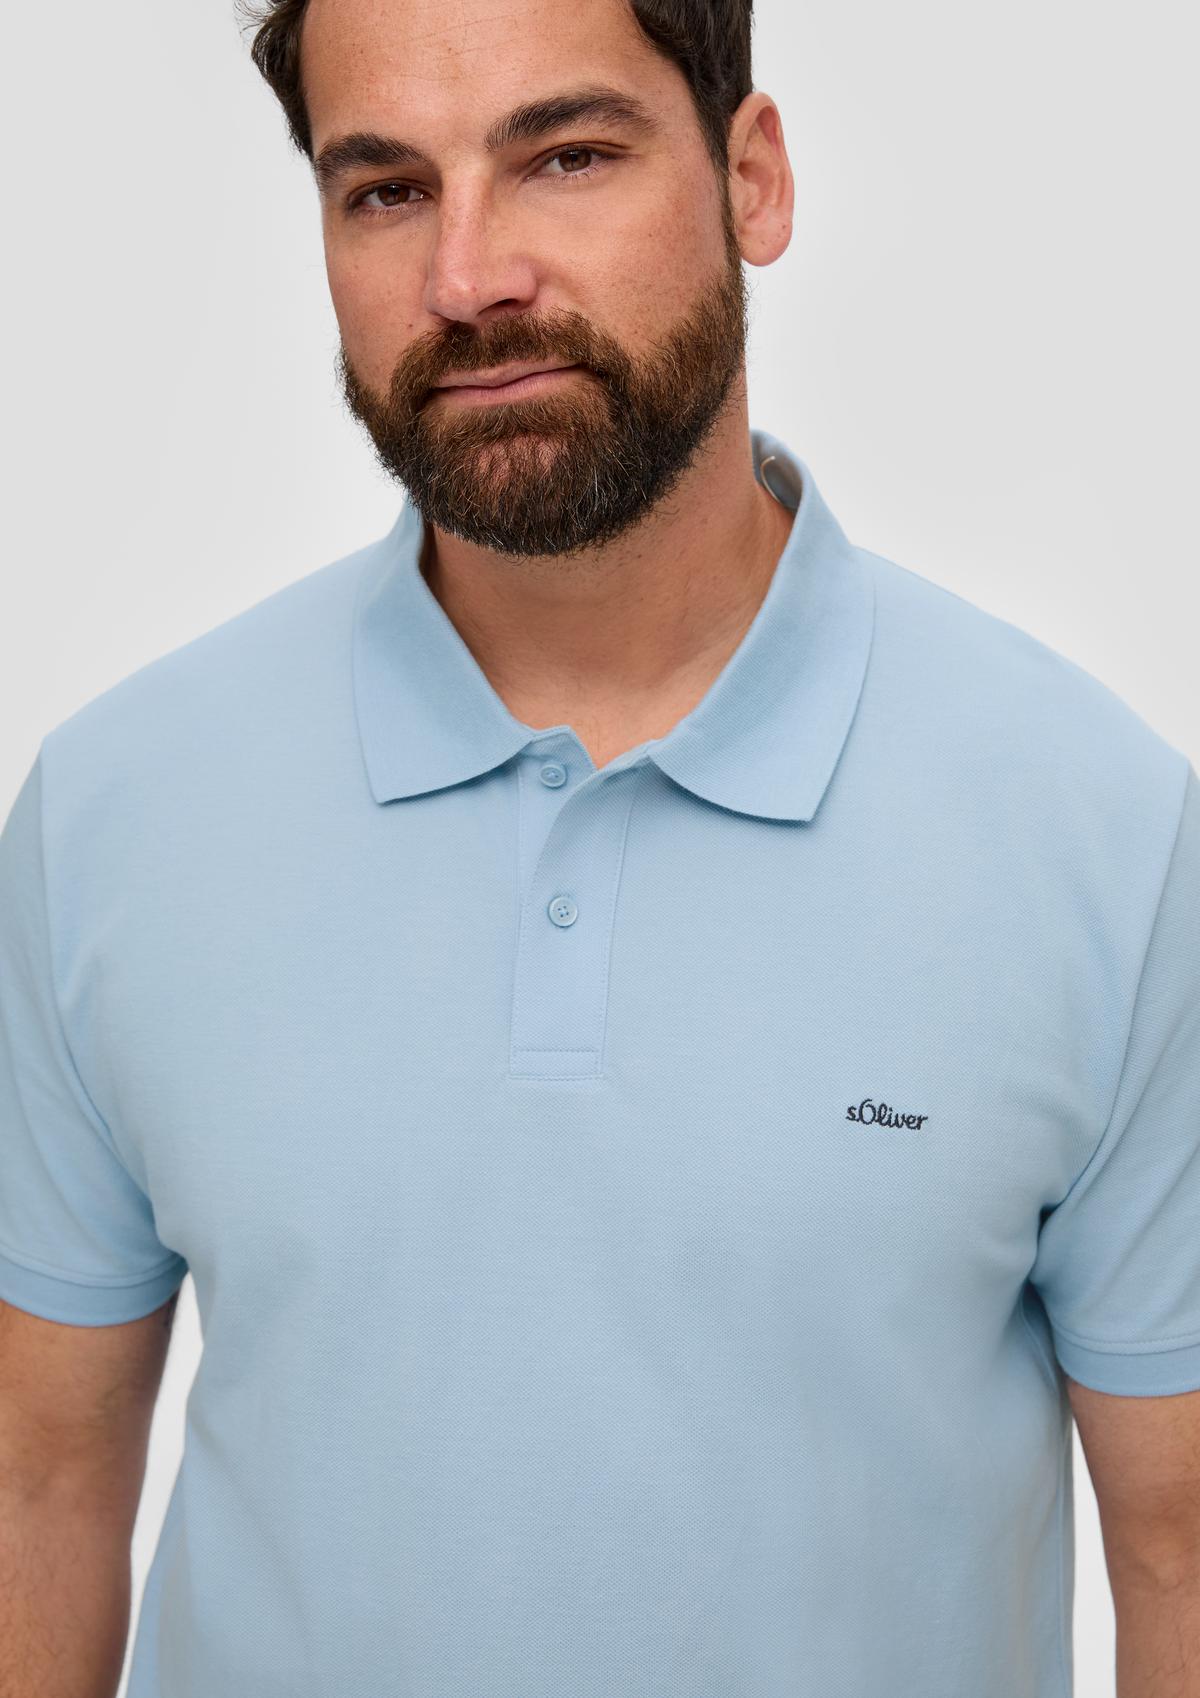 s.Oliver Polo shirt with a piqué texture